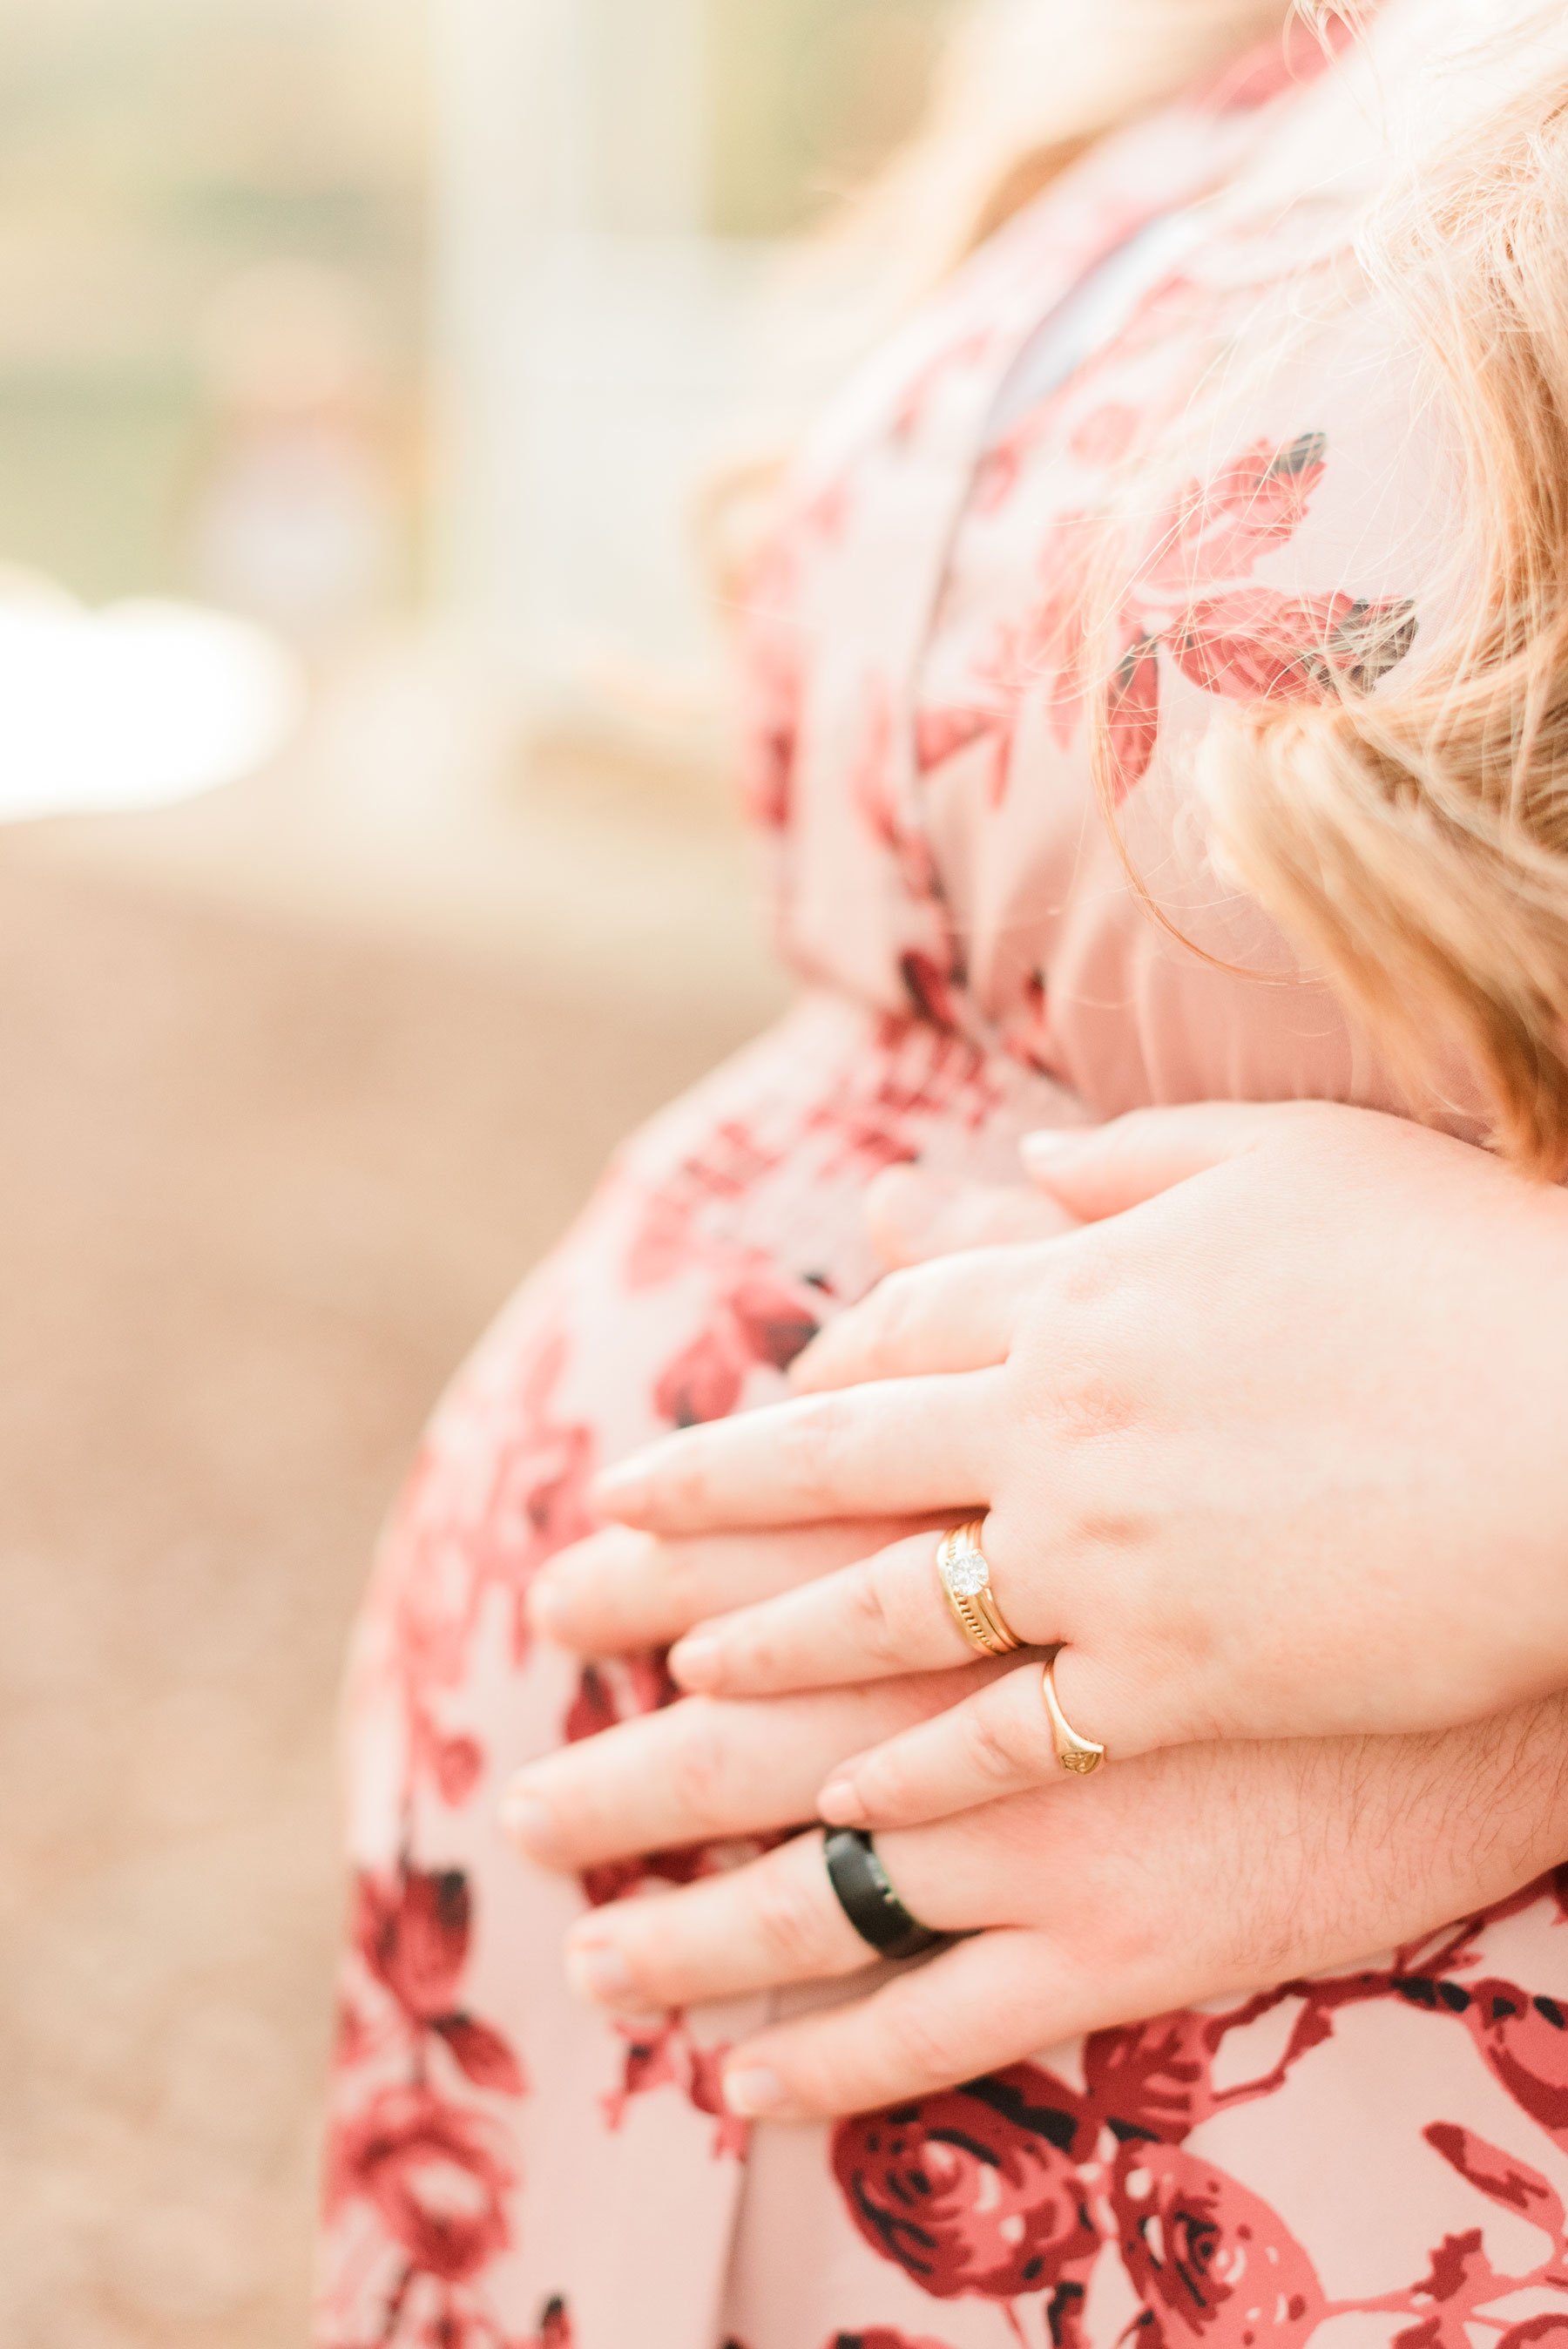  A husband and wife’s left hand with their wedding rings in focus rests on her pregnant belly. Hands-on baby bump wedding rings #familymaterintyphotos #pregnacyphotoshoot #peachtreecity #atlantafamilyphotographer #jacquieerickson #babybump 